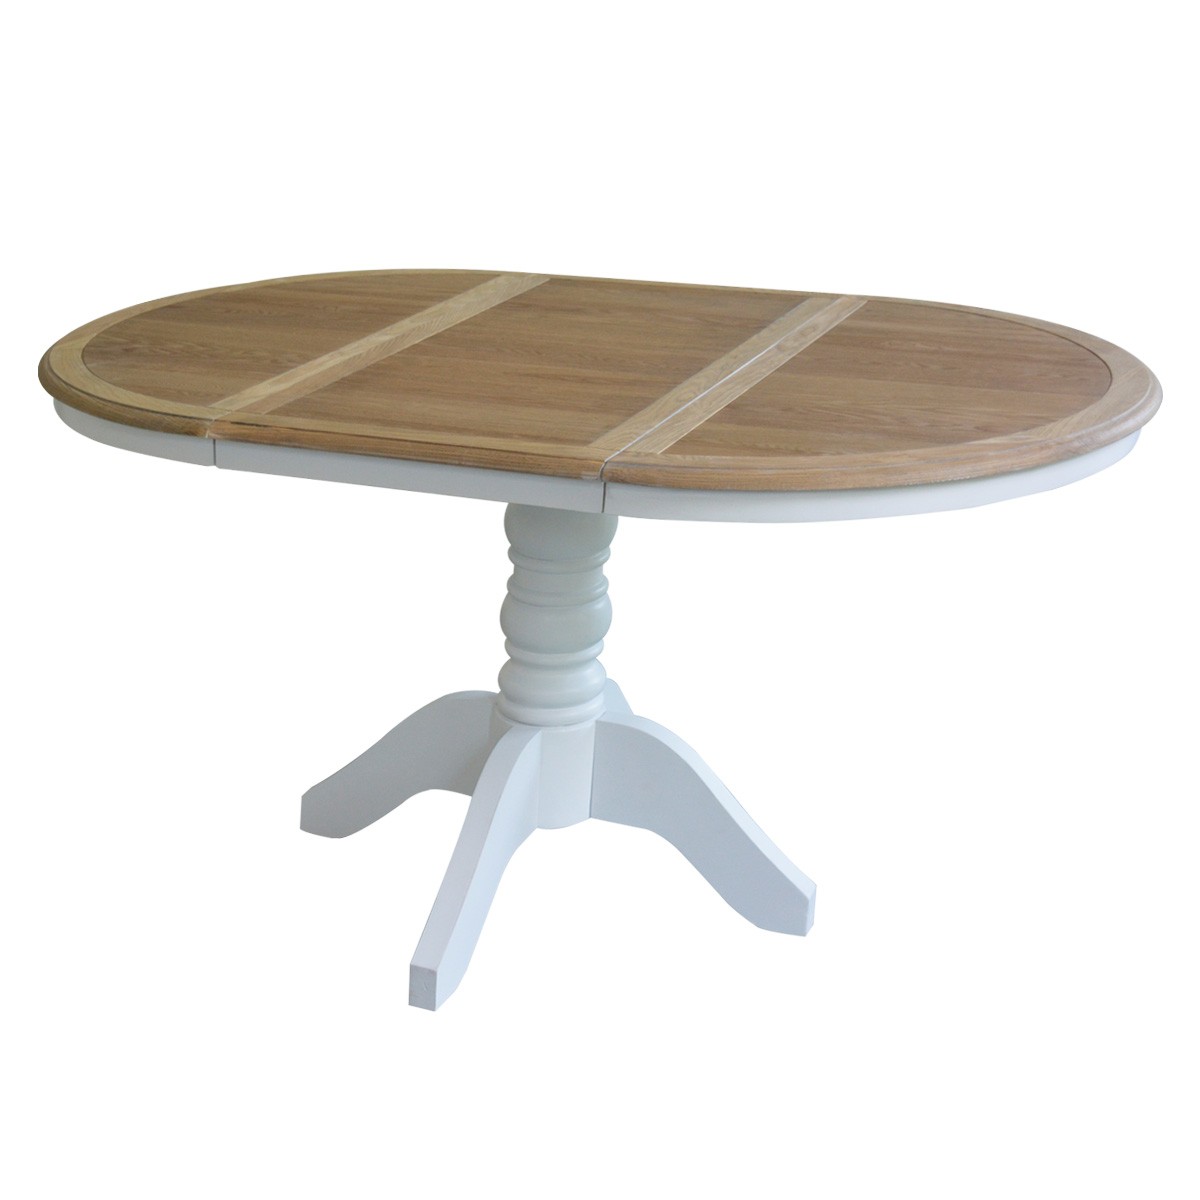 French Provincial Classic White Extendable Round Dining Table With Oak Top Wholesales Direct